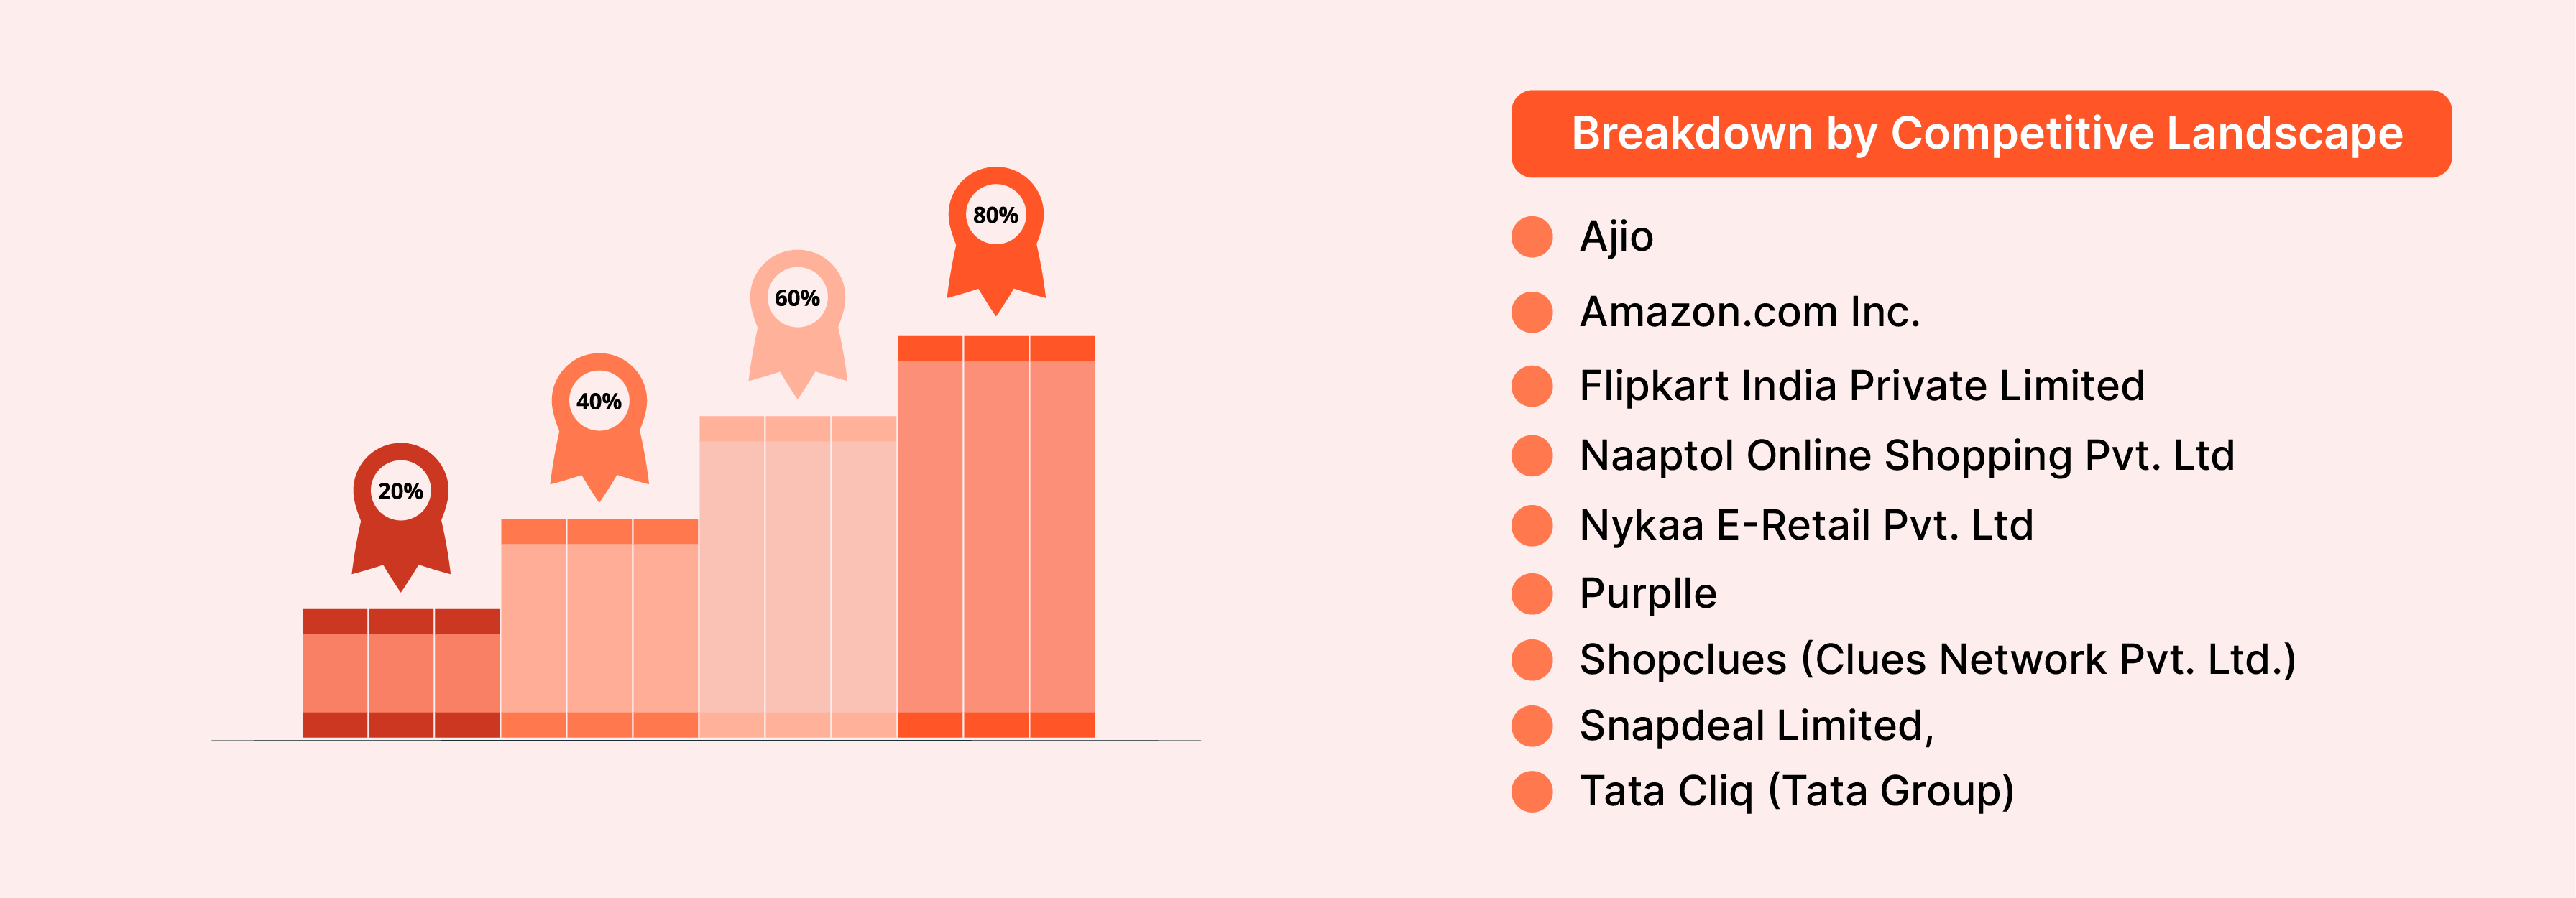 Analysis of India's eCommerce competitive landscape featuring leaders like Amazon and Flipkart